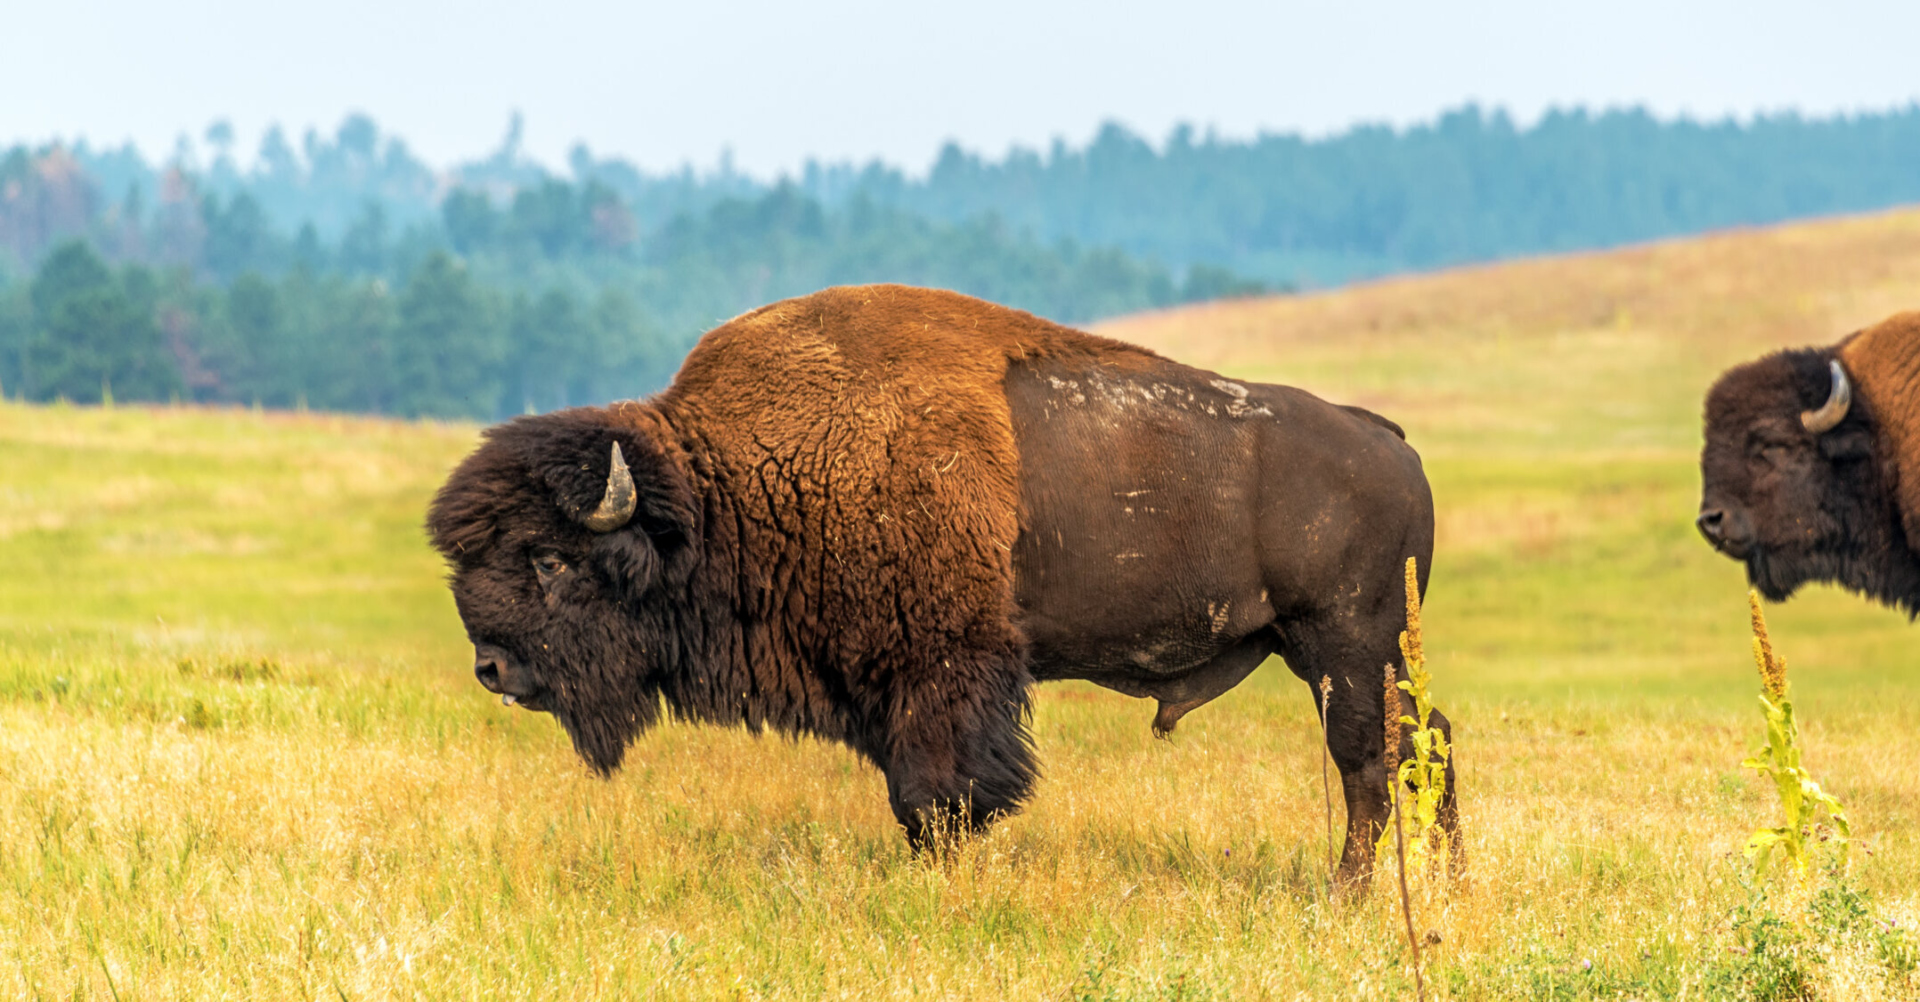 Two American Bison in the middle of an open field